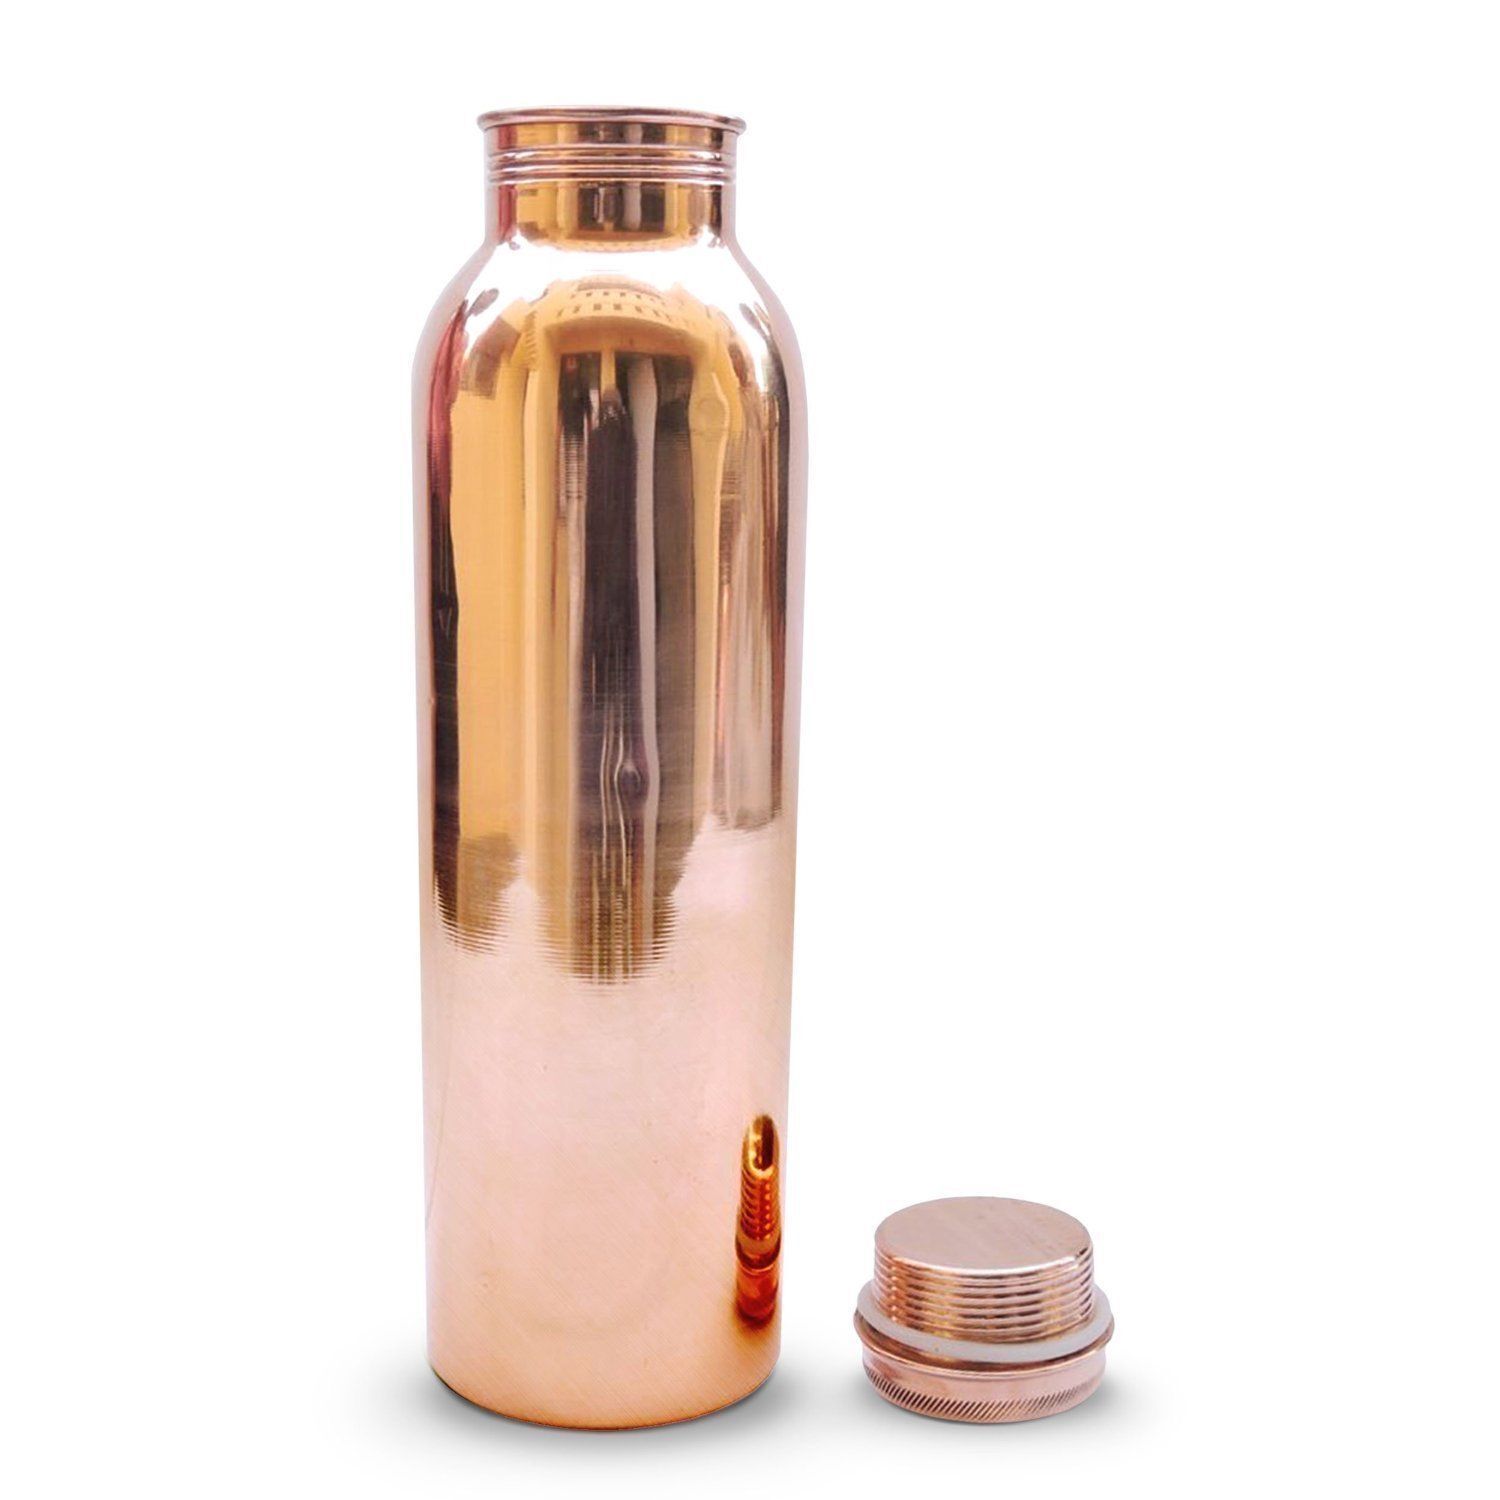 100% Pure Copper Water Bottle For Yoga Ayurveda Health Benefits 950 ml Capacity